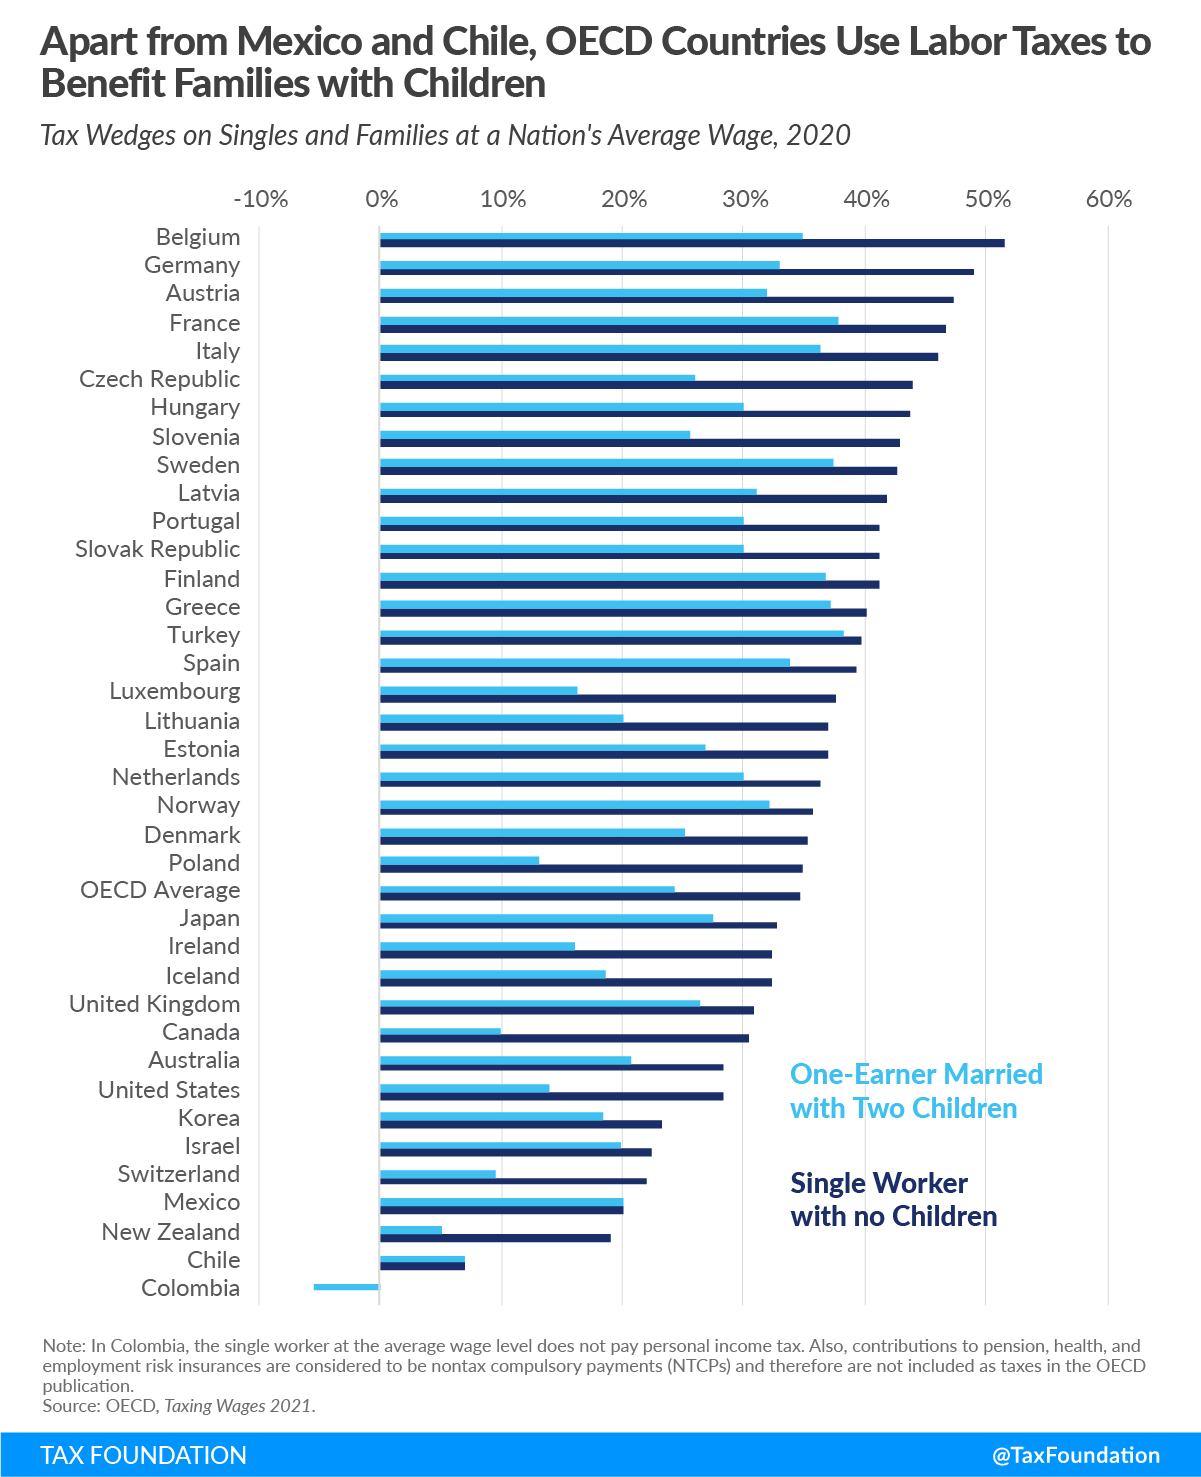 Apart from Mexico and Chile, OECD Countries use labor taxes to benefit families with children 2021